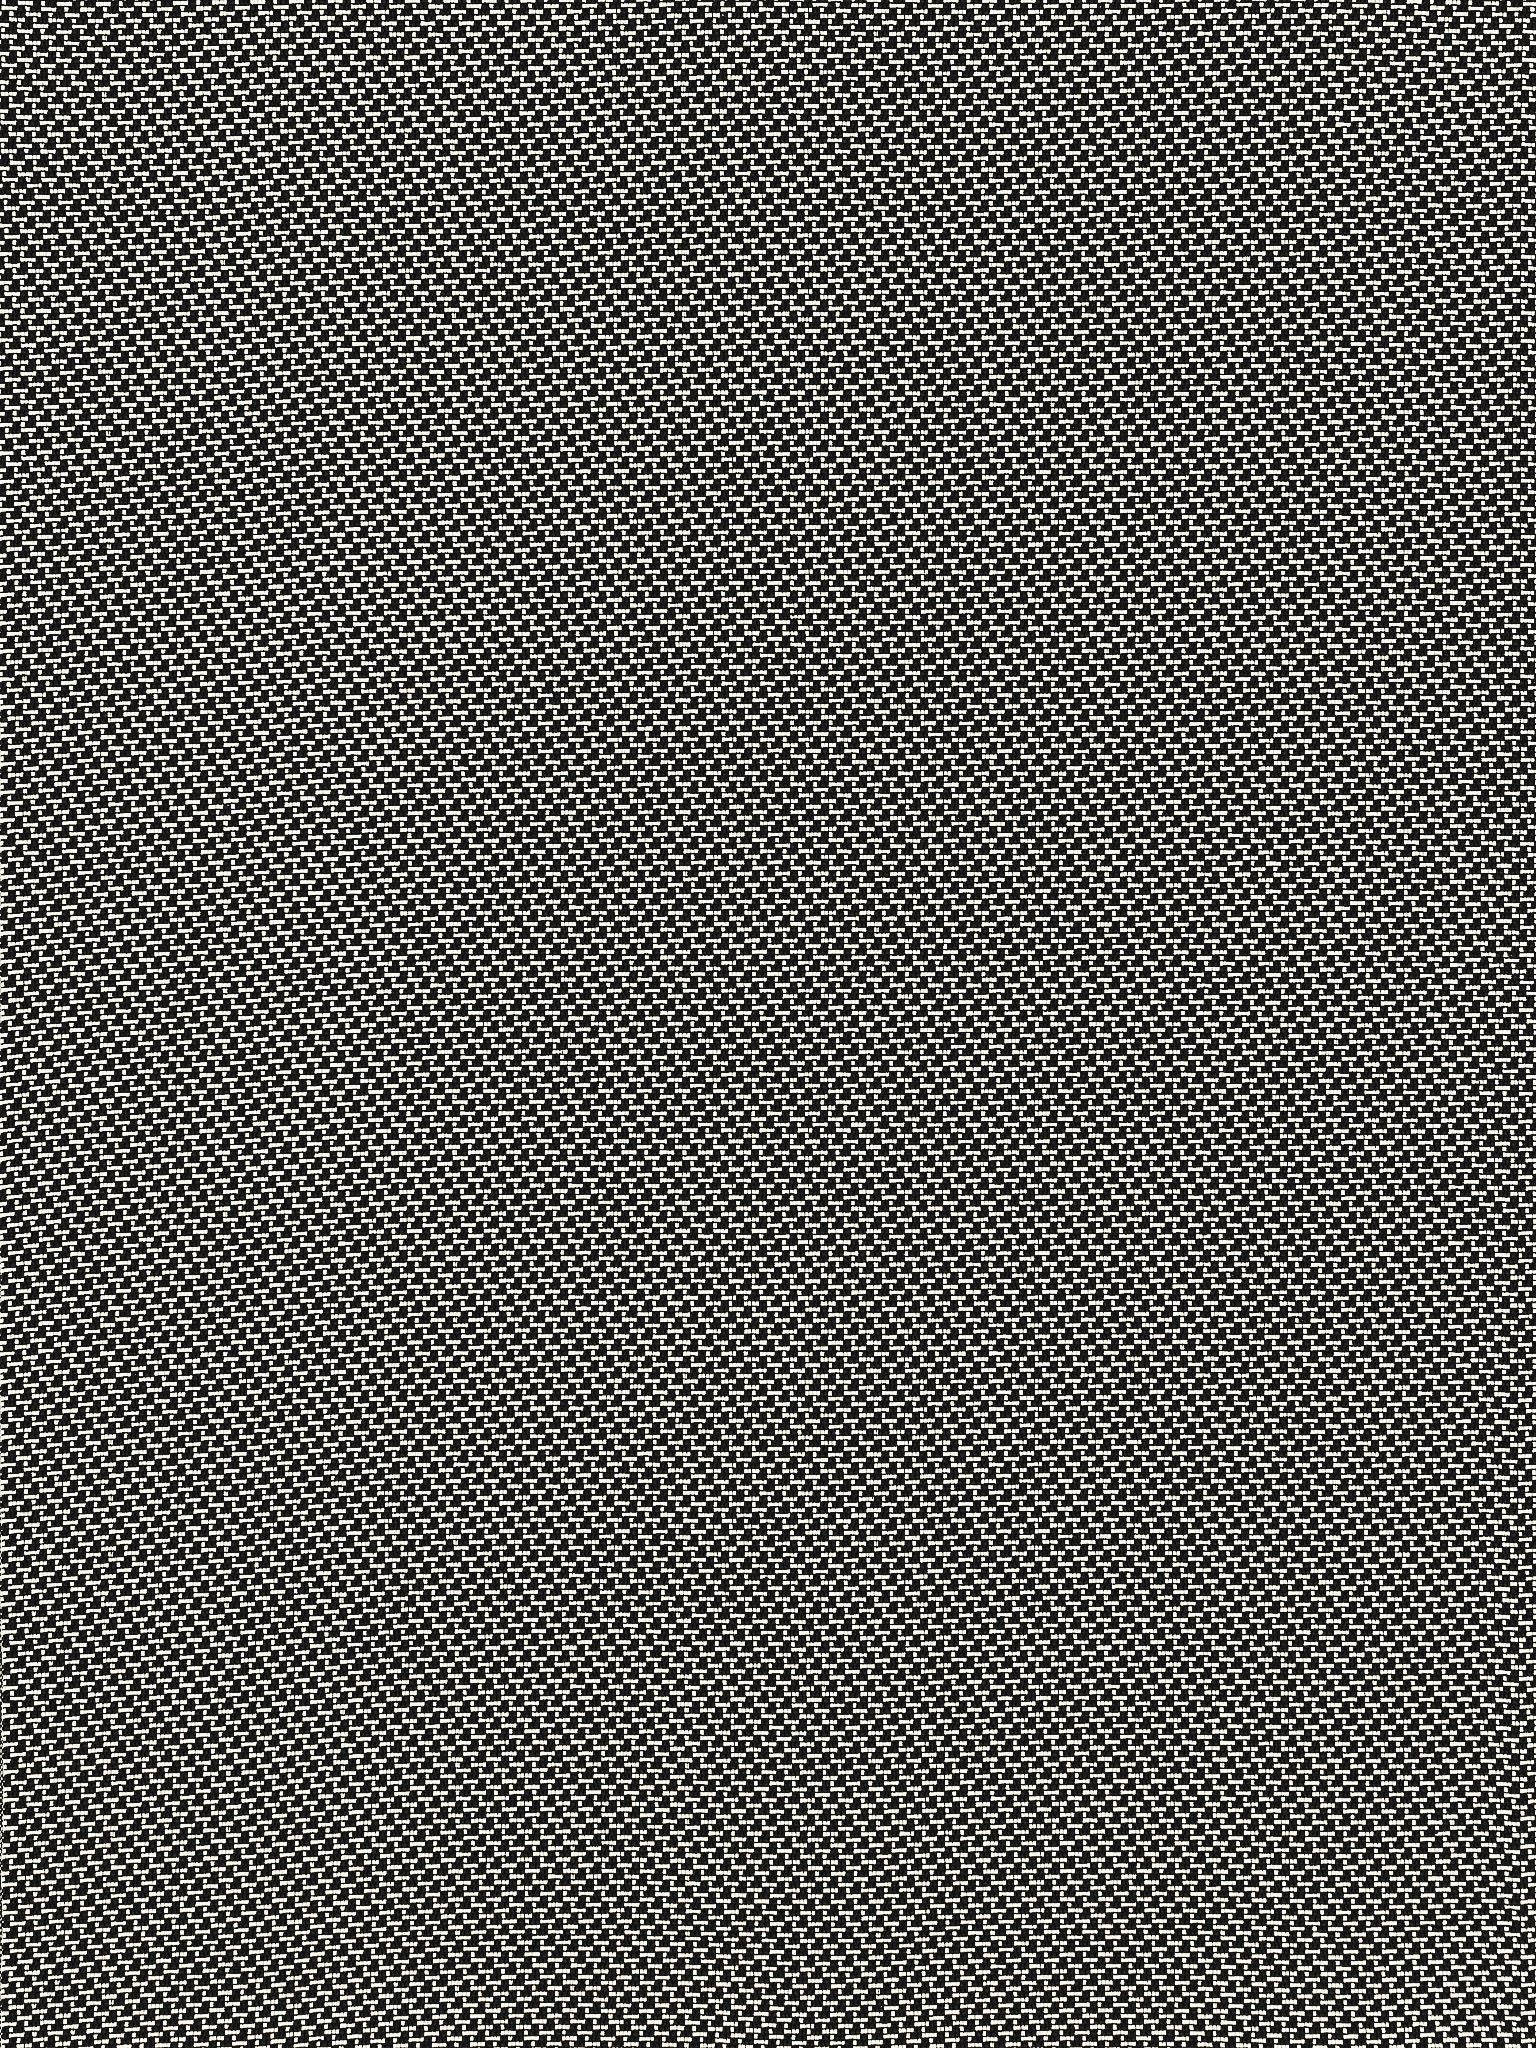 North Downs fabric in onyx color - pattern number EY 000513ND - by Scalamandre in the Old World Weavers collection